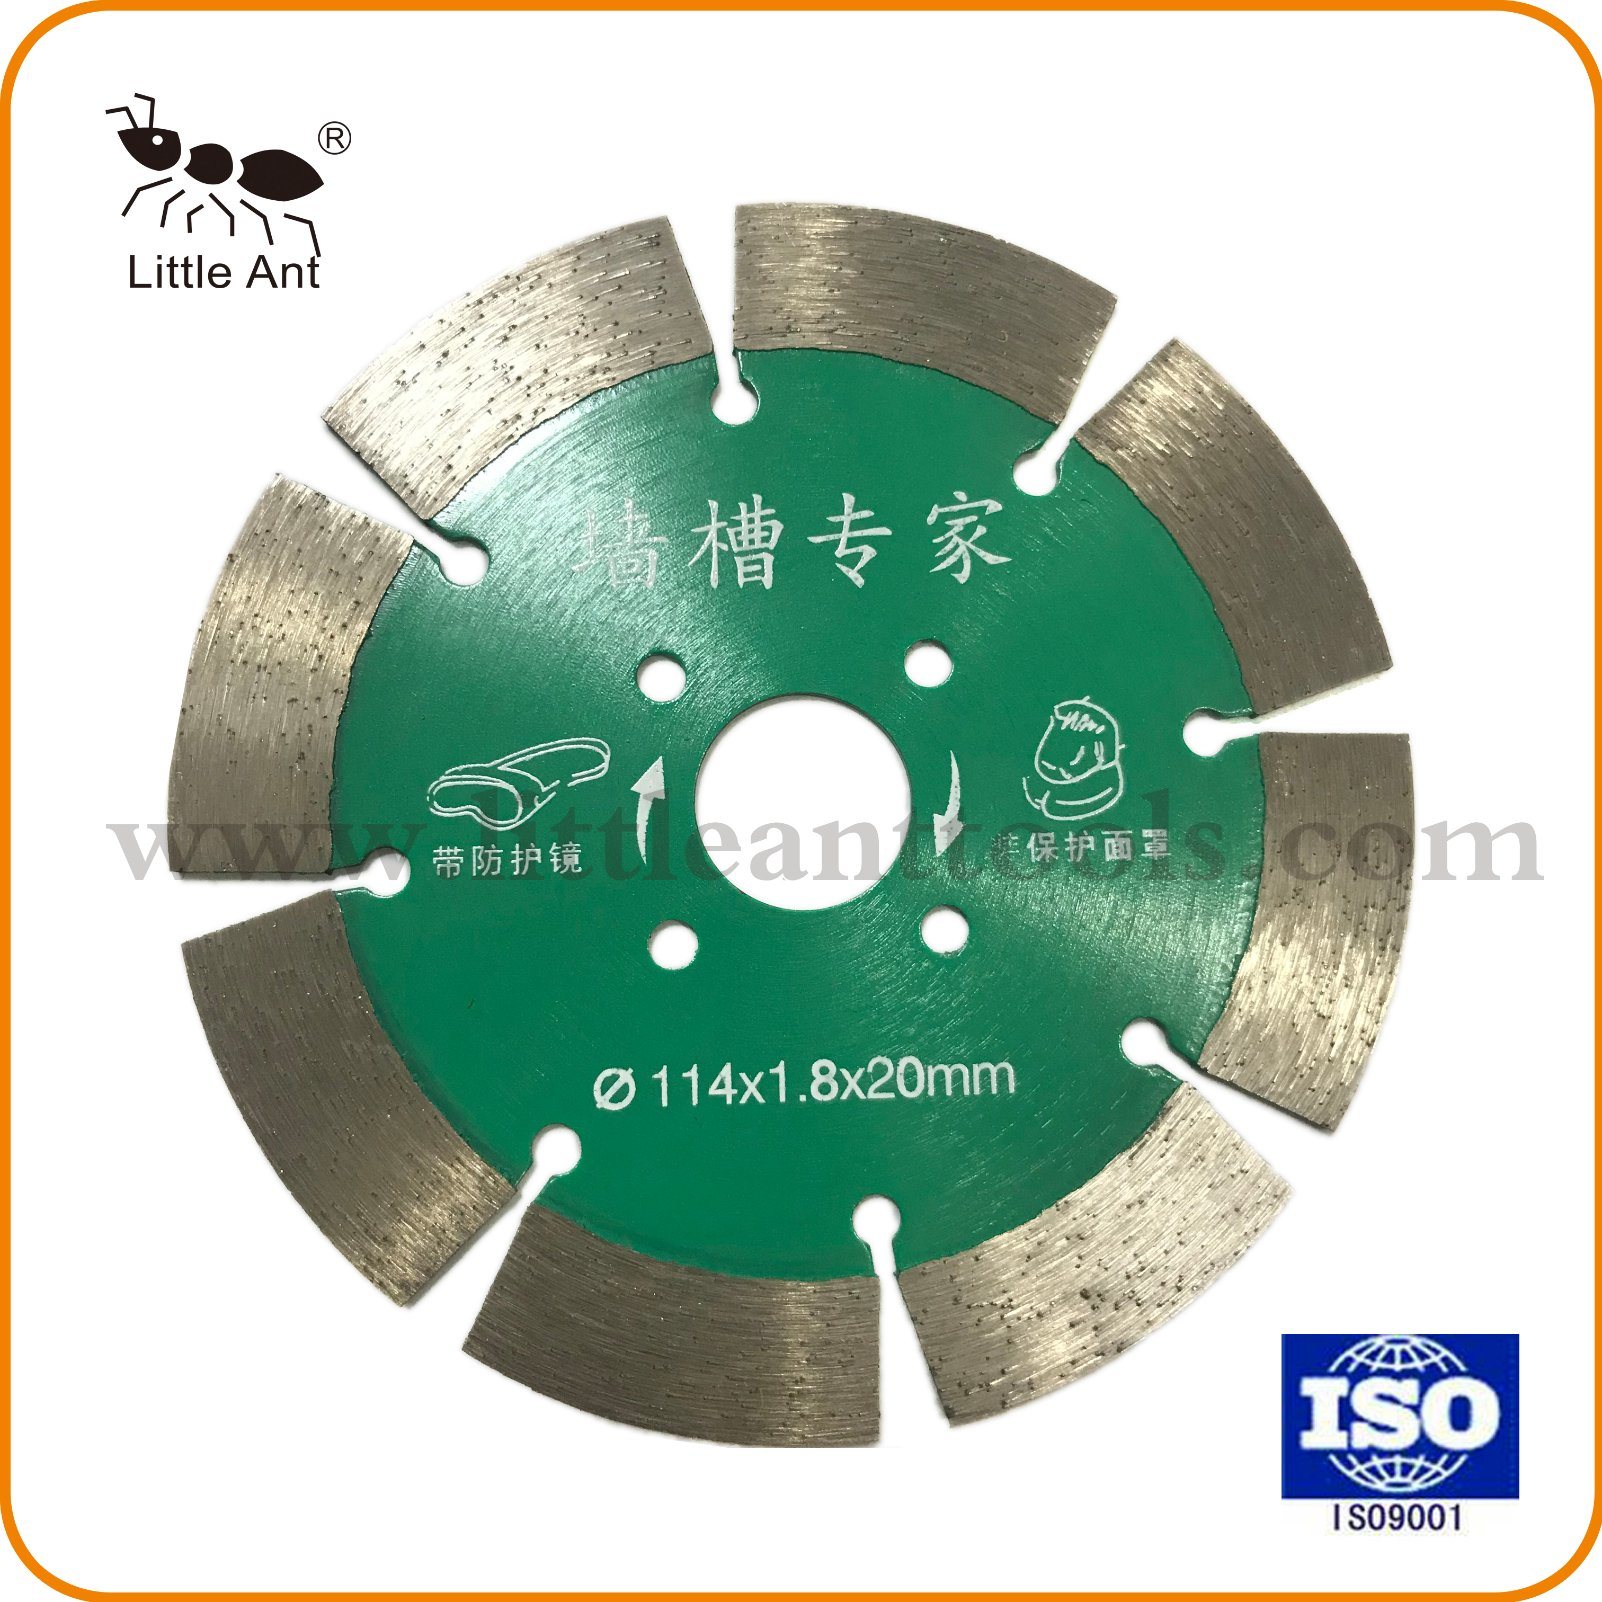 Wall Hardware Tools Hot Pressed Cutting Disk Sintered Diamond Saw Blade for Wall 114mm/4.5